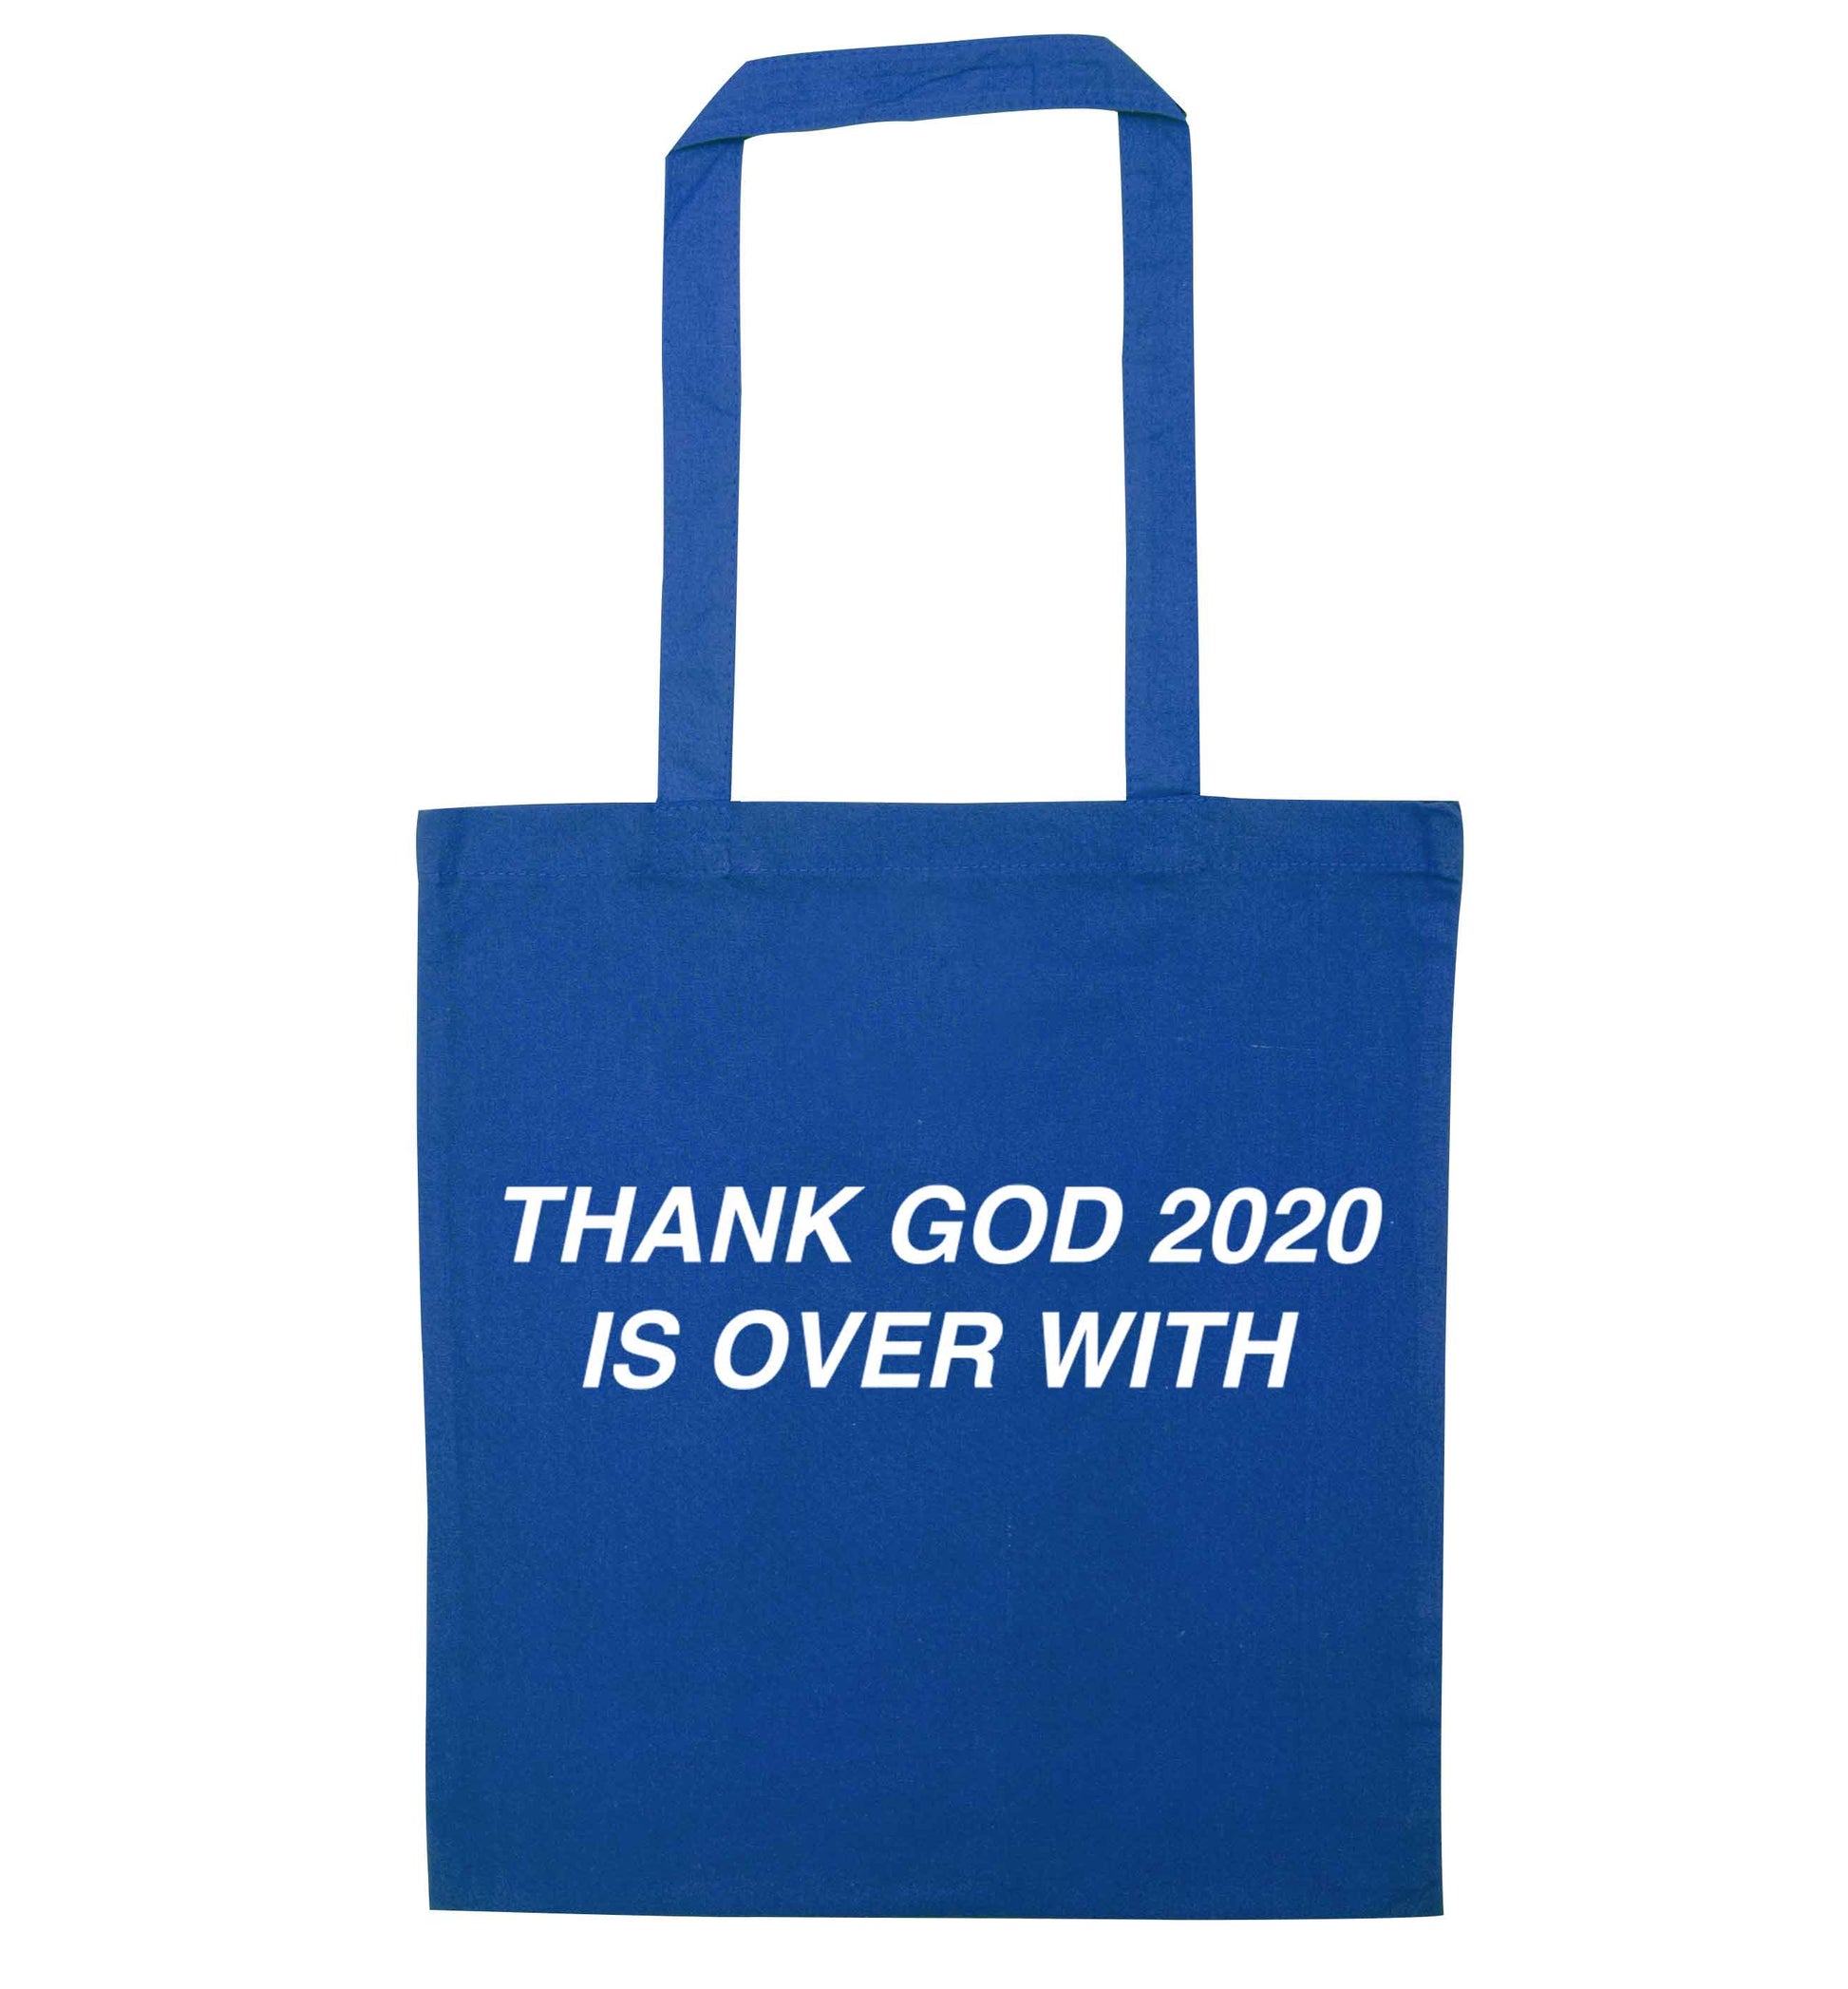 Thank god 2020 is over with blue tote bag